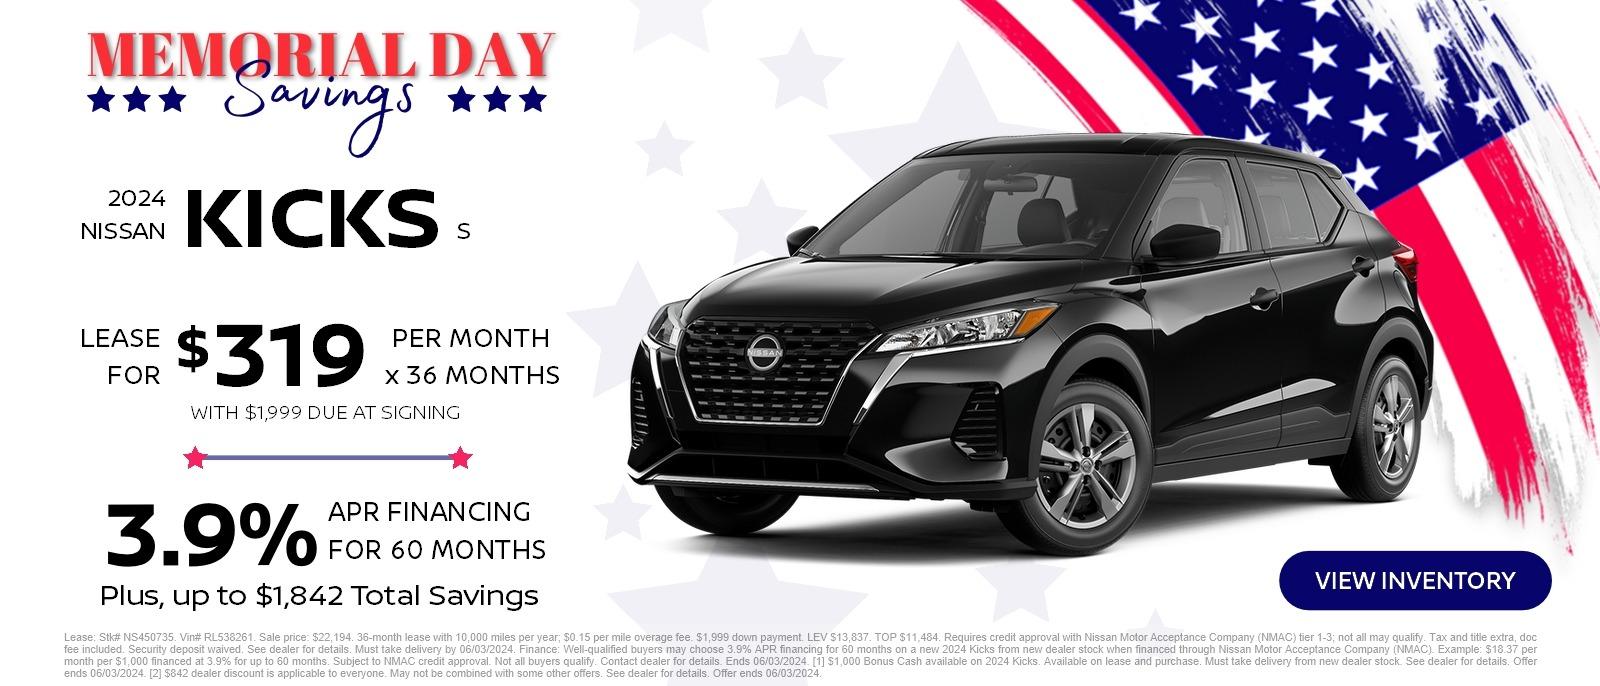 Memorial Day Savings
2024 Nissan Kicks S
Lease for $319 per month x 36 months with $1900 due at signing
or
3.9% APR Financing for 60 months
plus, up to $1,842 total savings